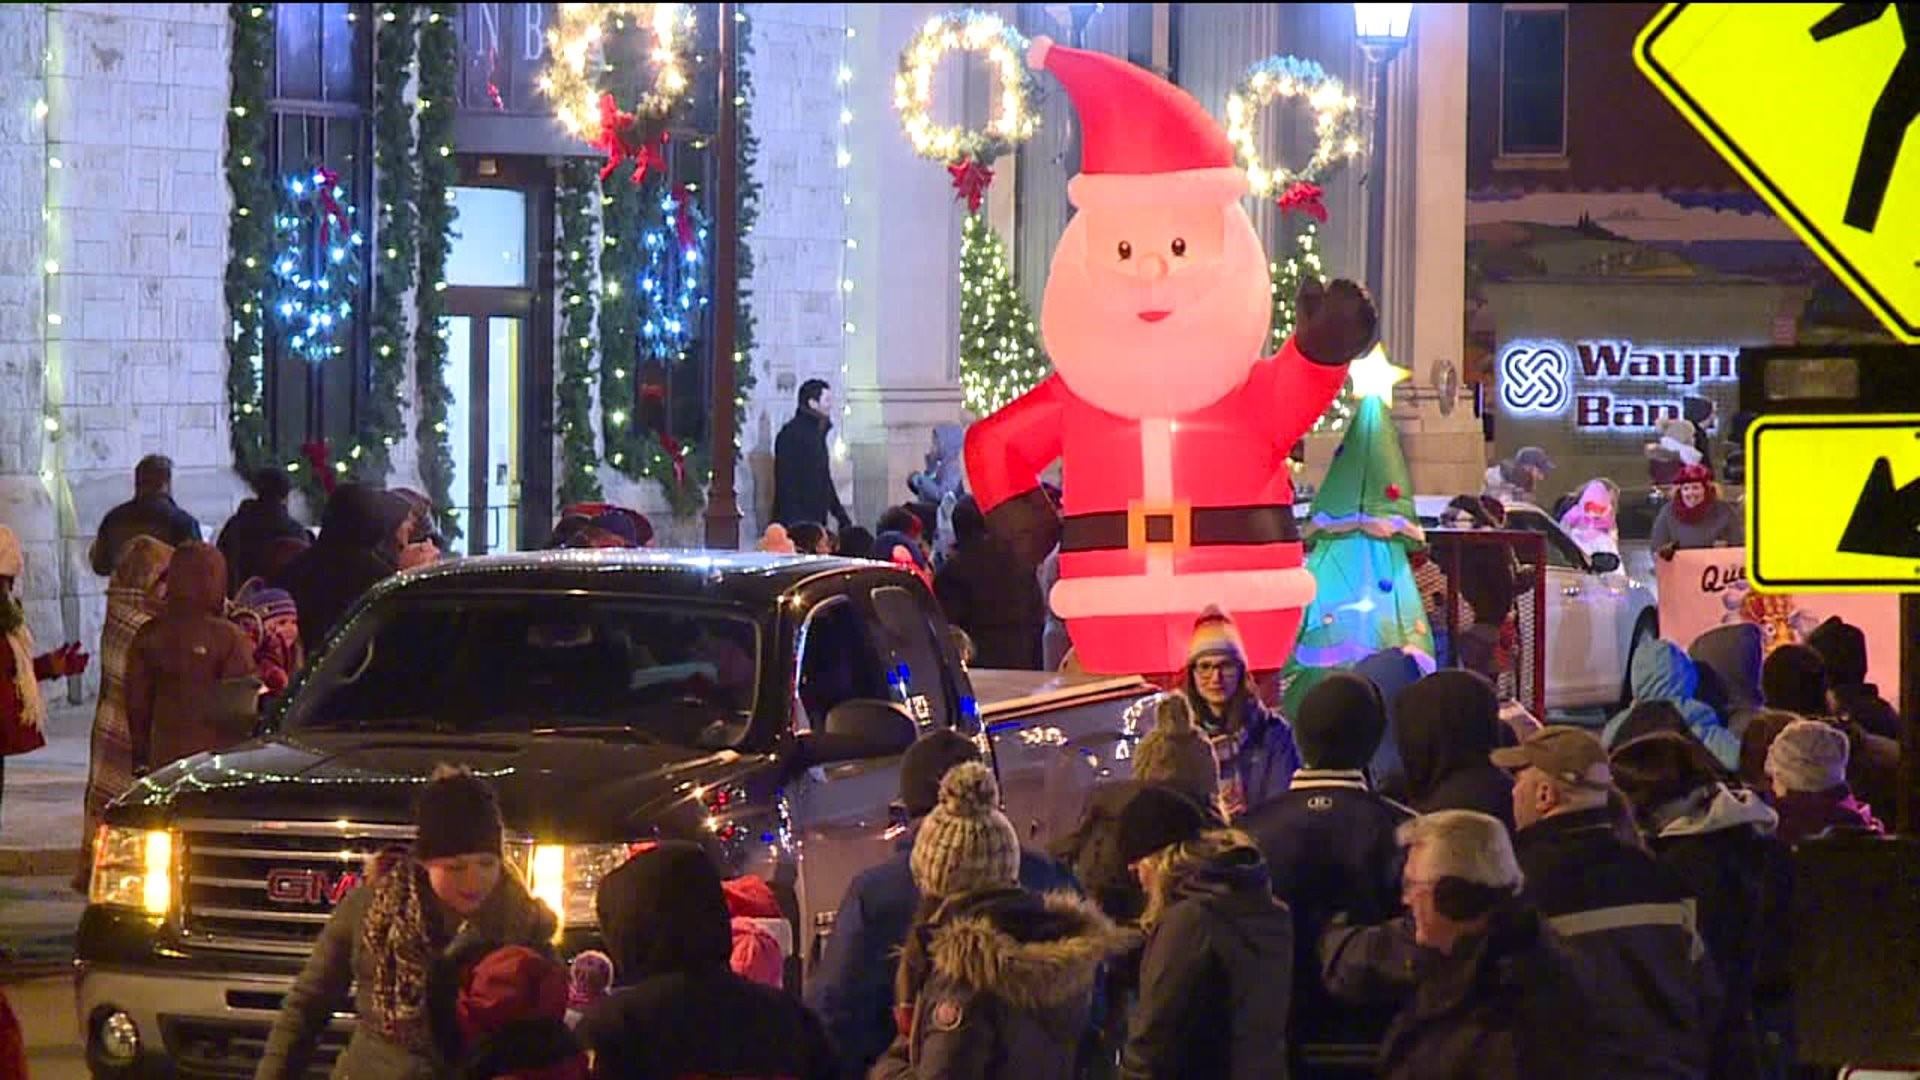 Despite Sub-Freezing Temperatures, Honesdale Community Turns Out For Annual Santa Parade